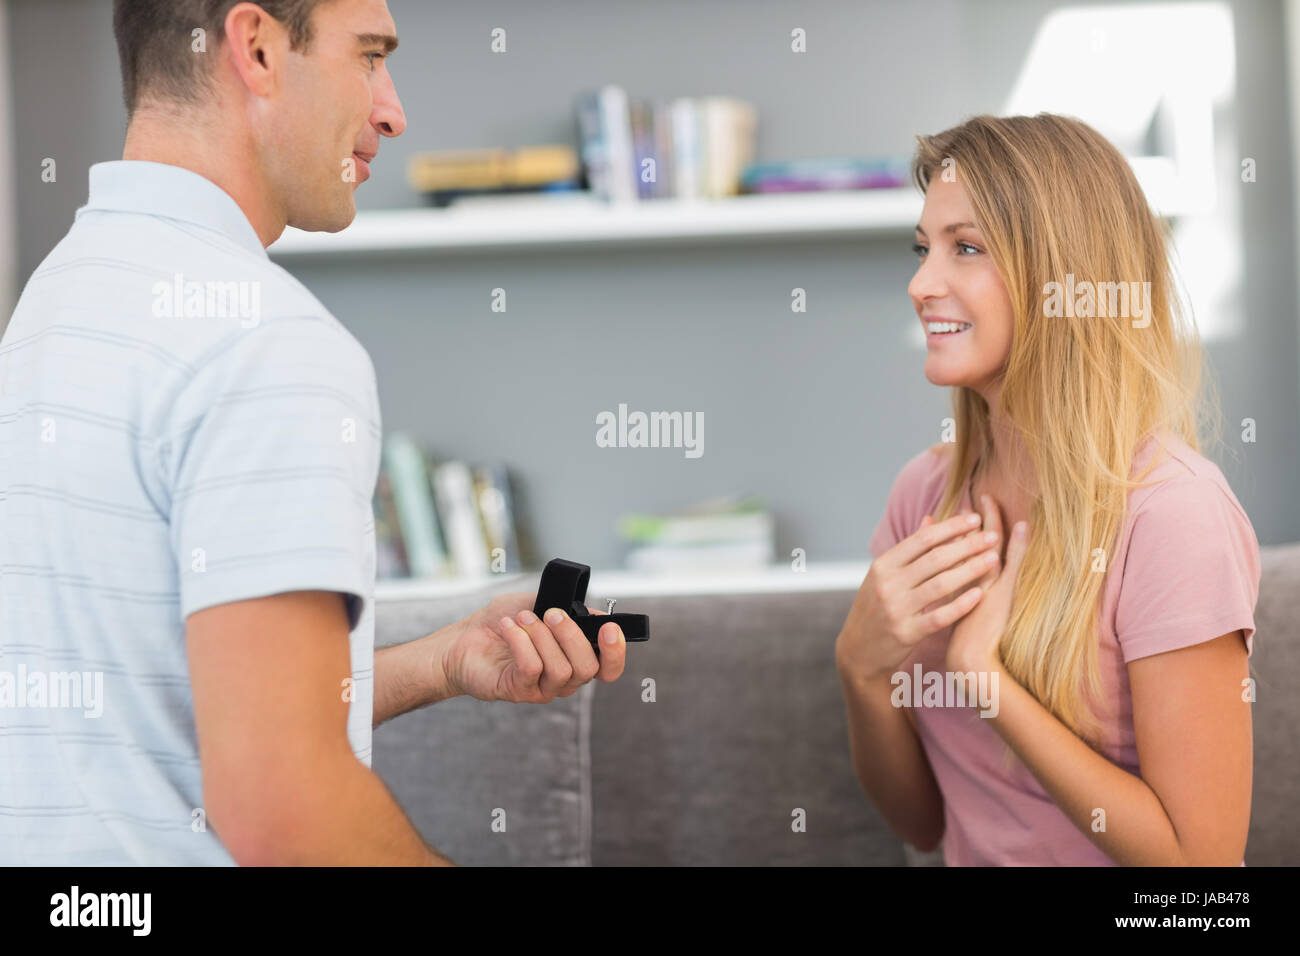 Man on one knee proposing to girlfriend in sitting room at home Stock Photo